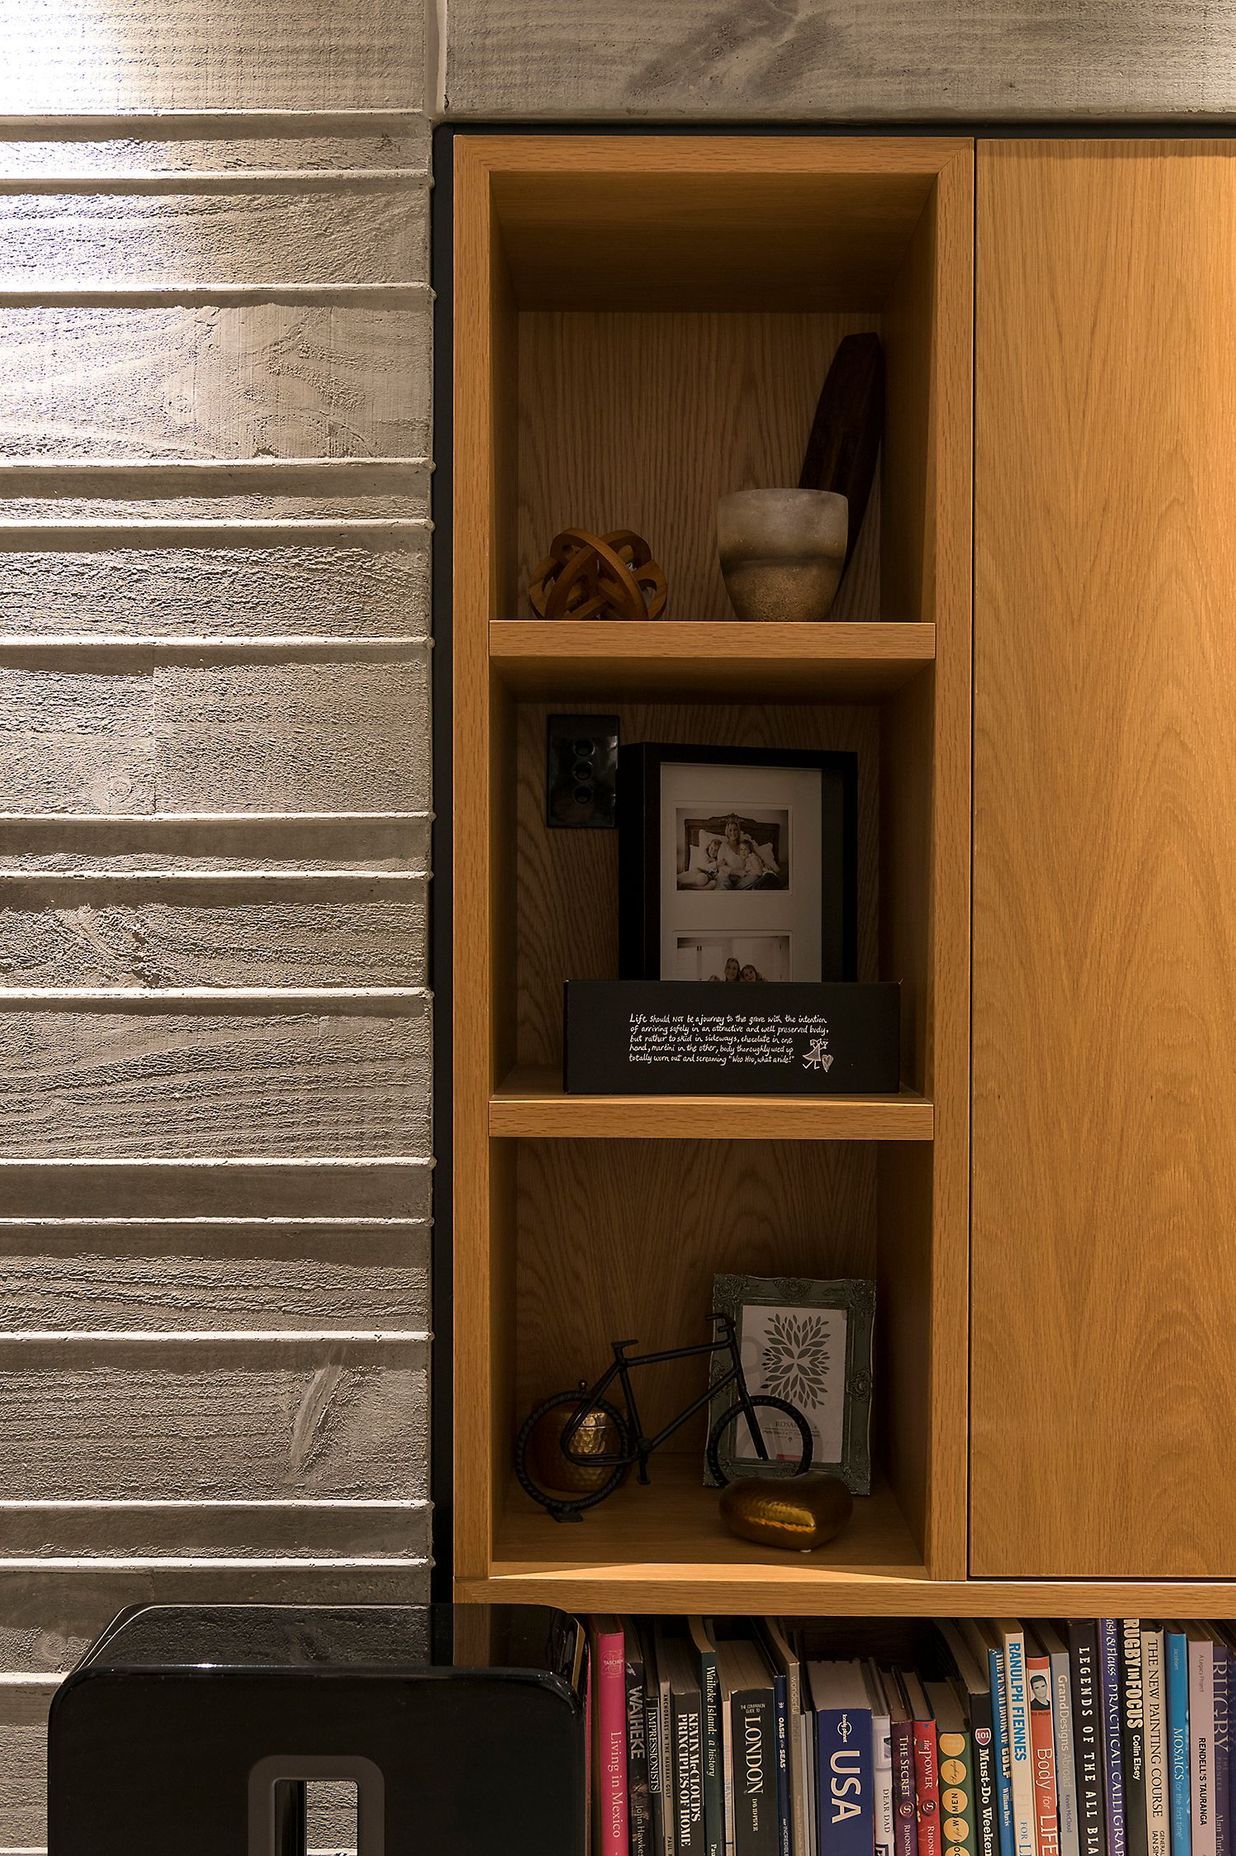 The home utilises bespoke cabinetry in pale oak, adding warmth to the concrete walls.